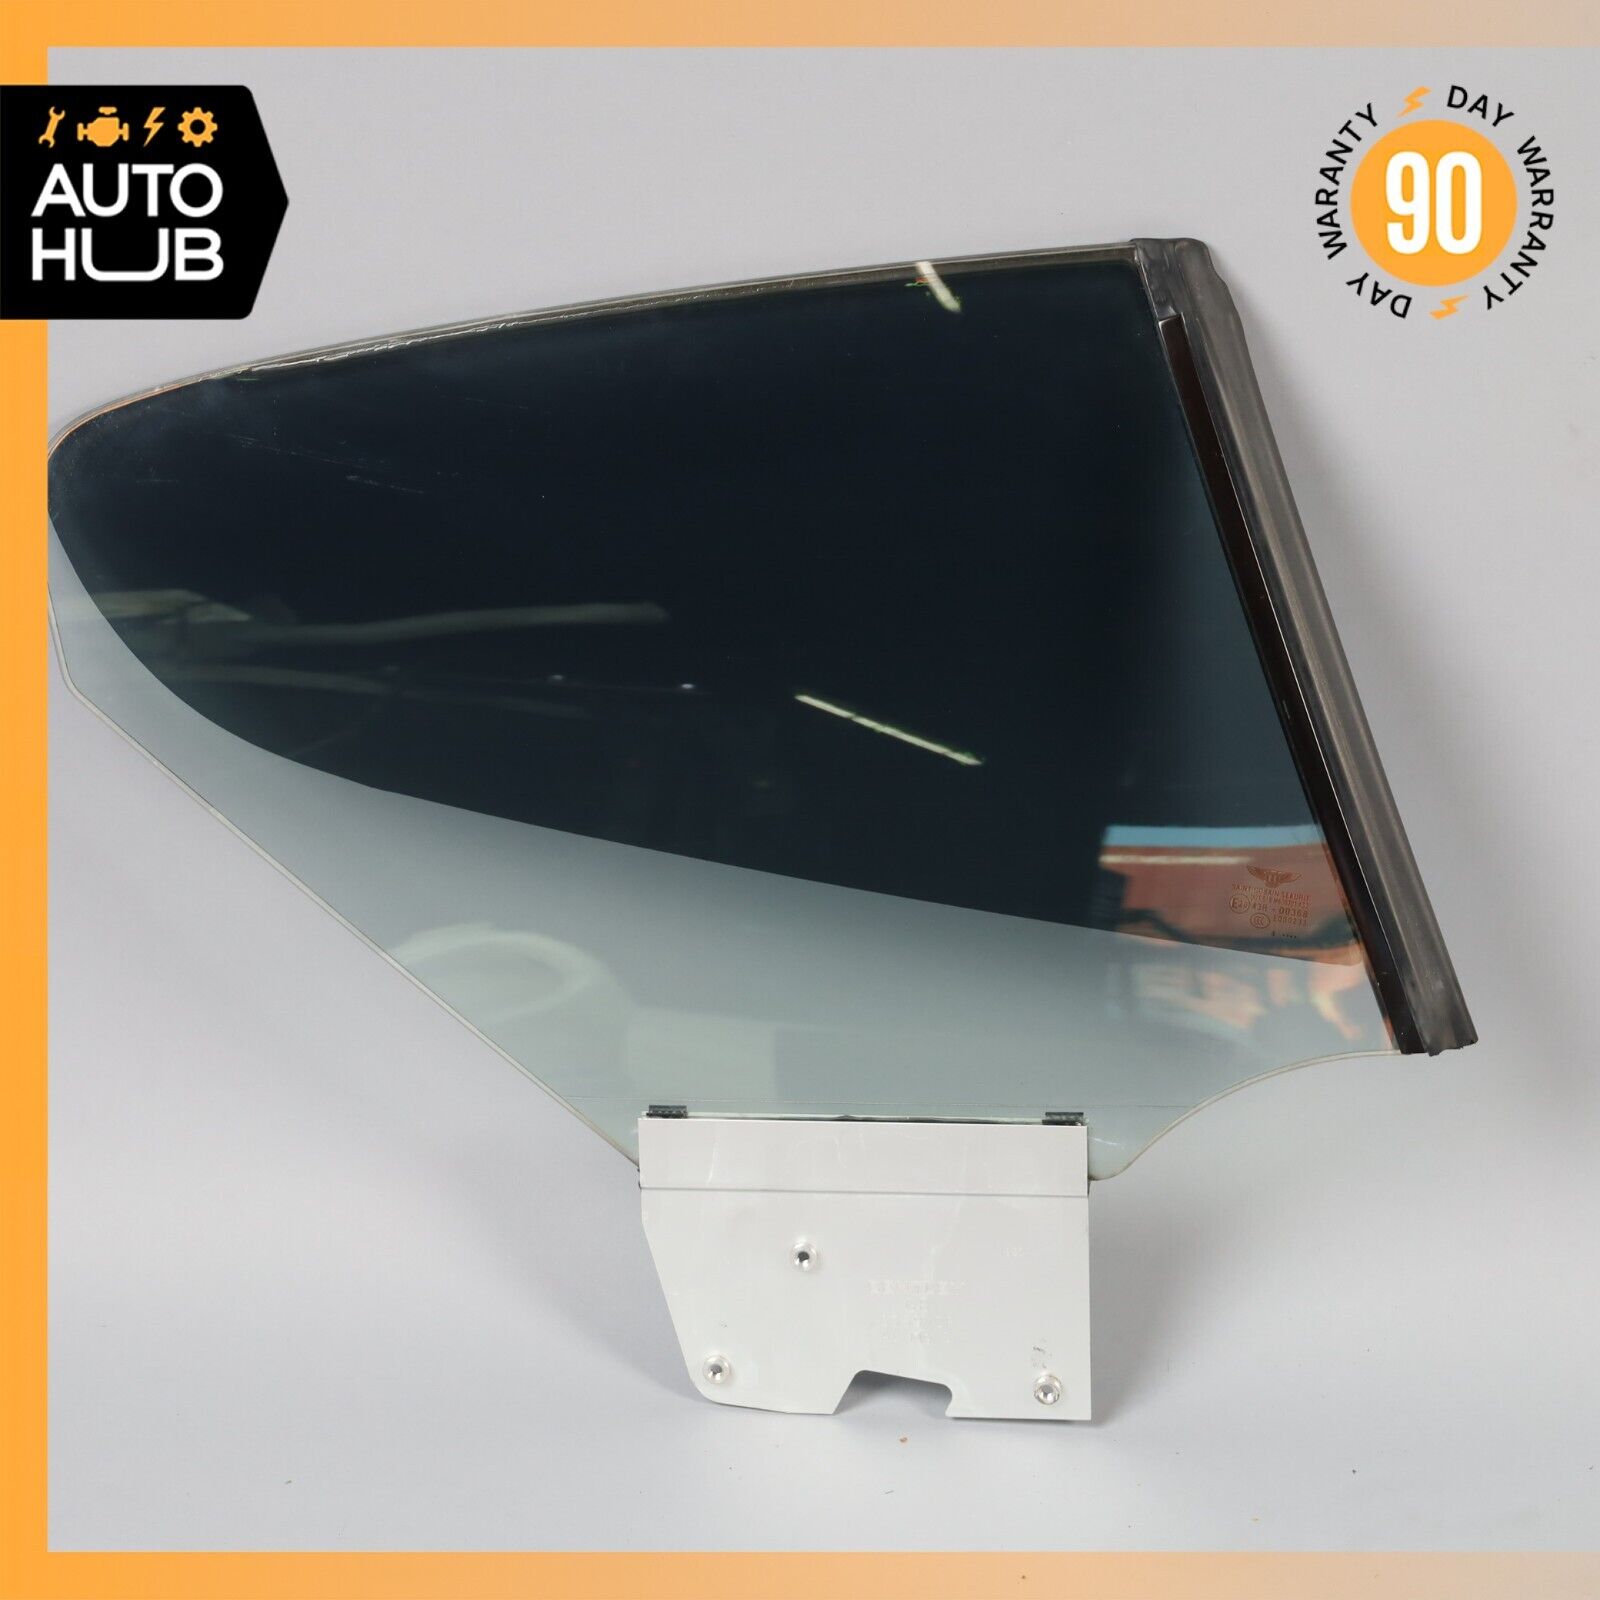 03-10 Bentley Continental GT Coupe Rear Right Side Quarter Window Glass OEM 92k